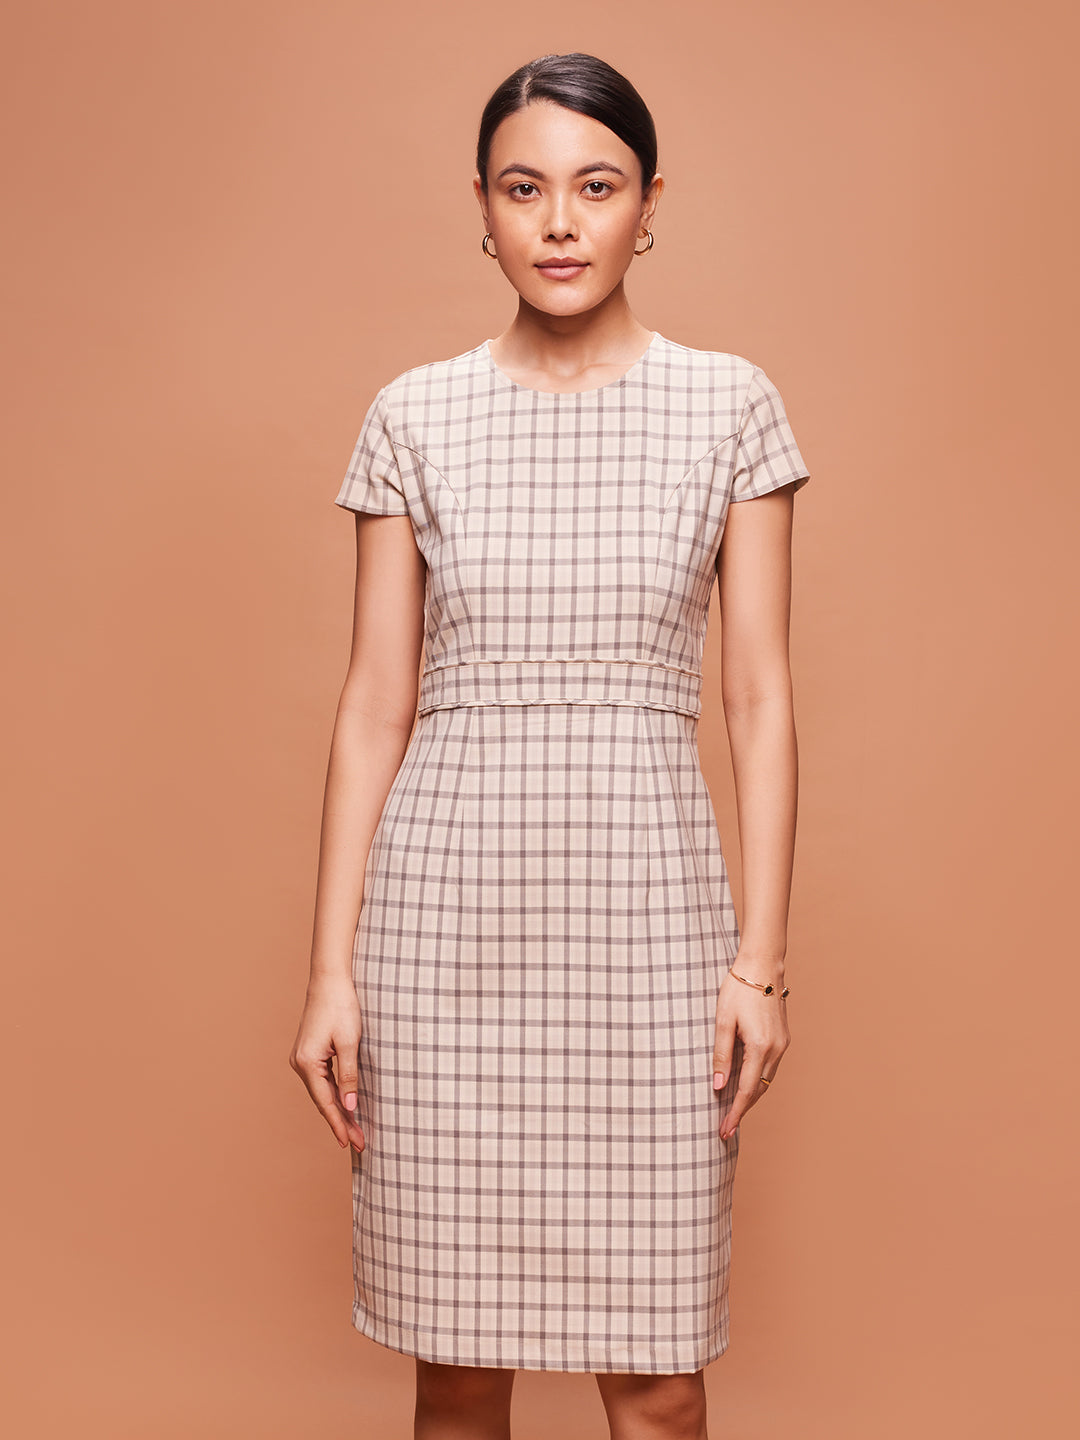 Bombay High Women's Chequered Beige Fitted Dress